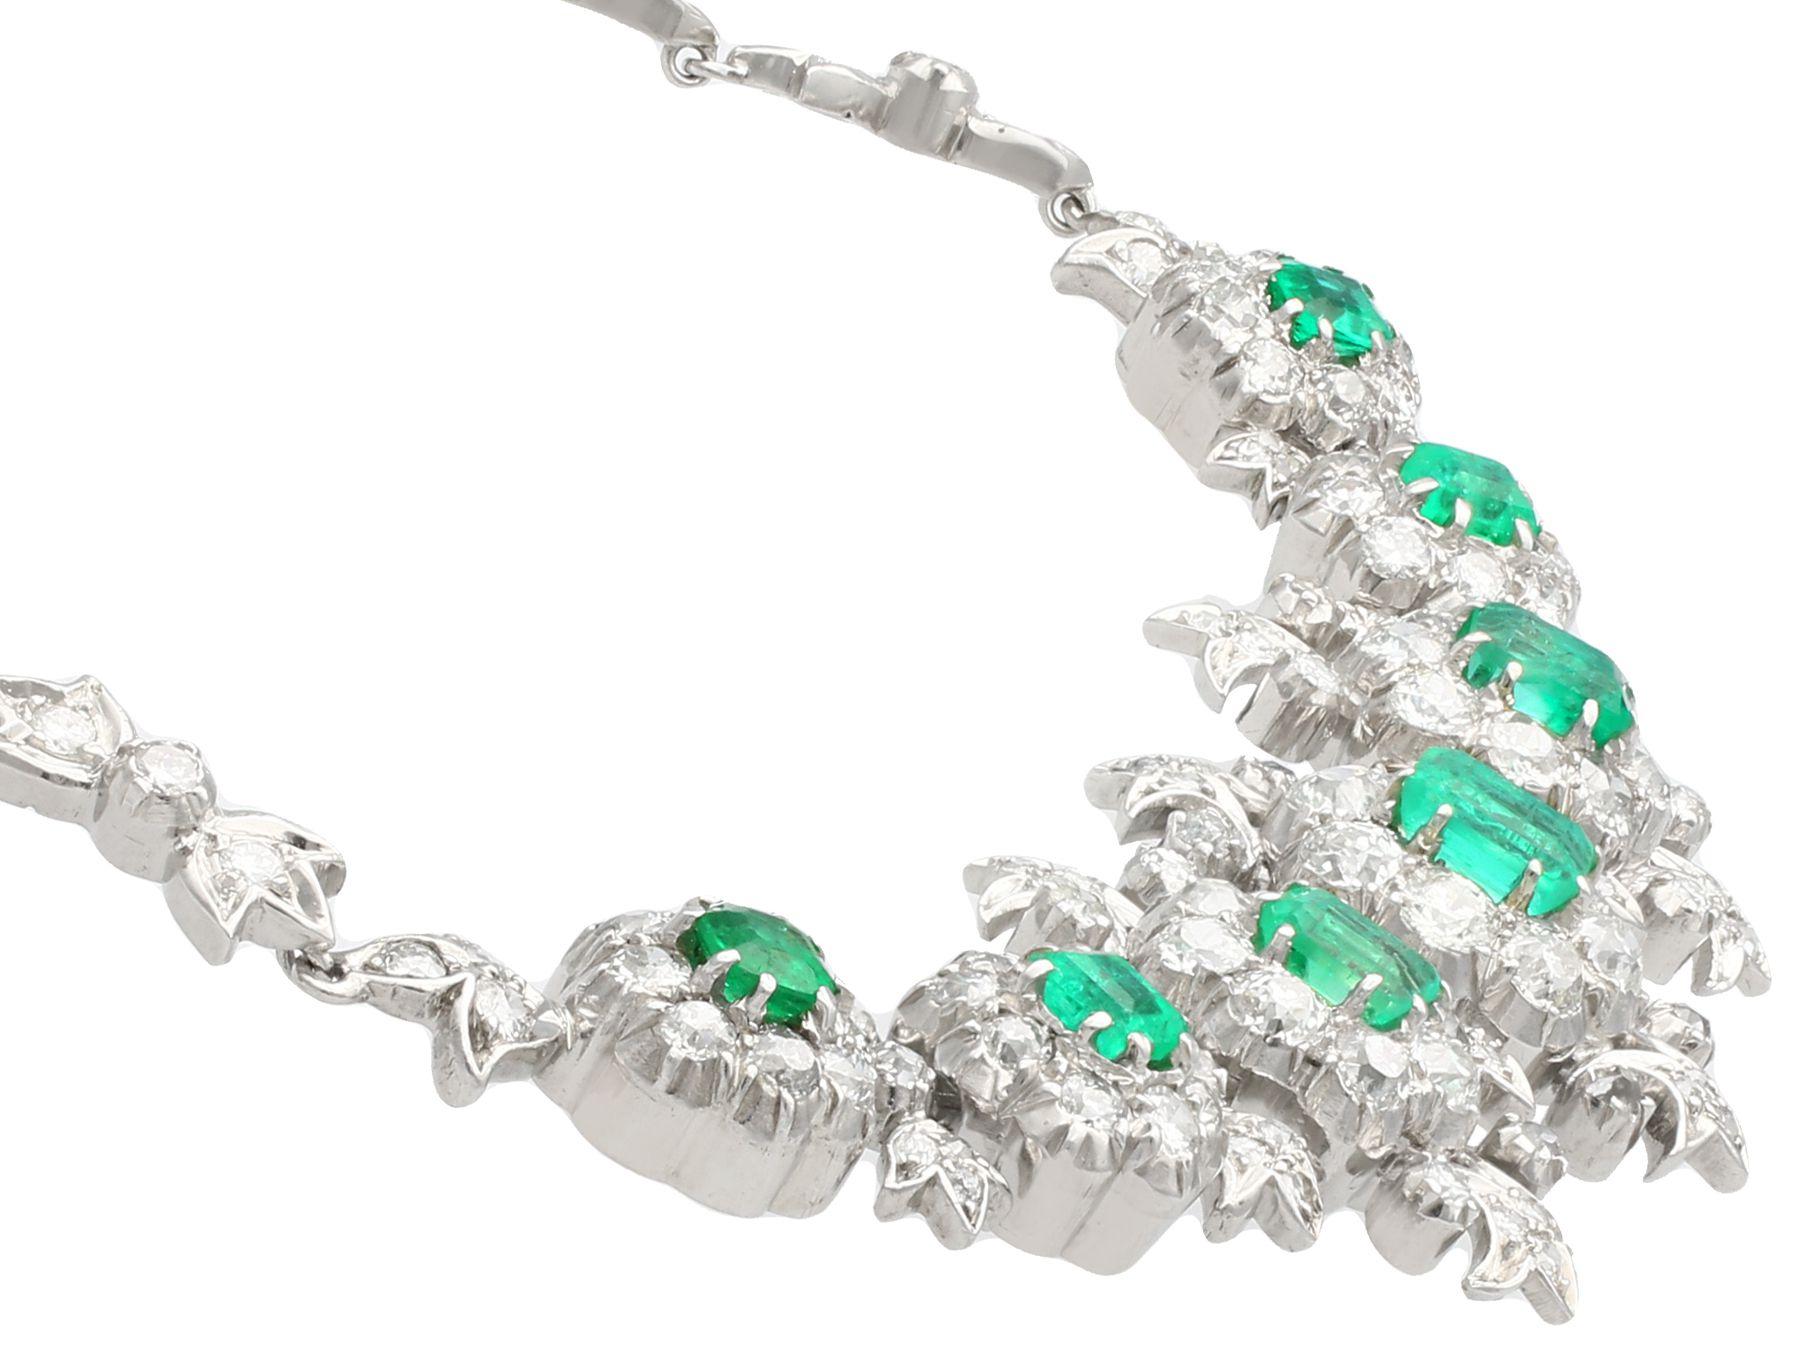 Women's 1940s 9.39 Carat Diamond and 4.10 Carat Emerald White Gold Necklace